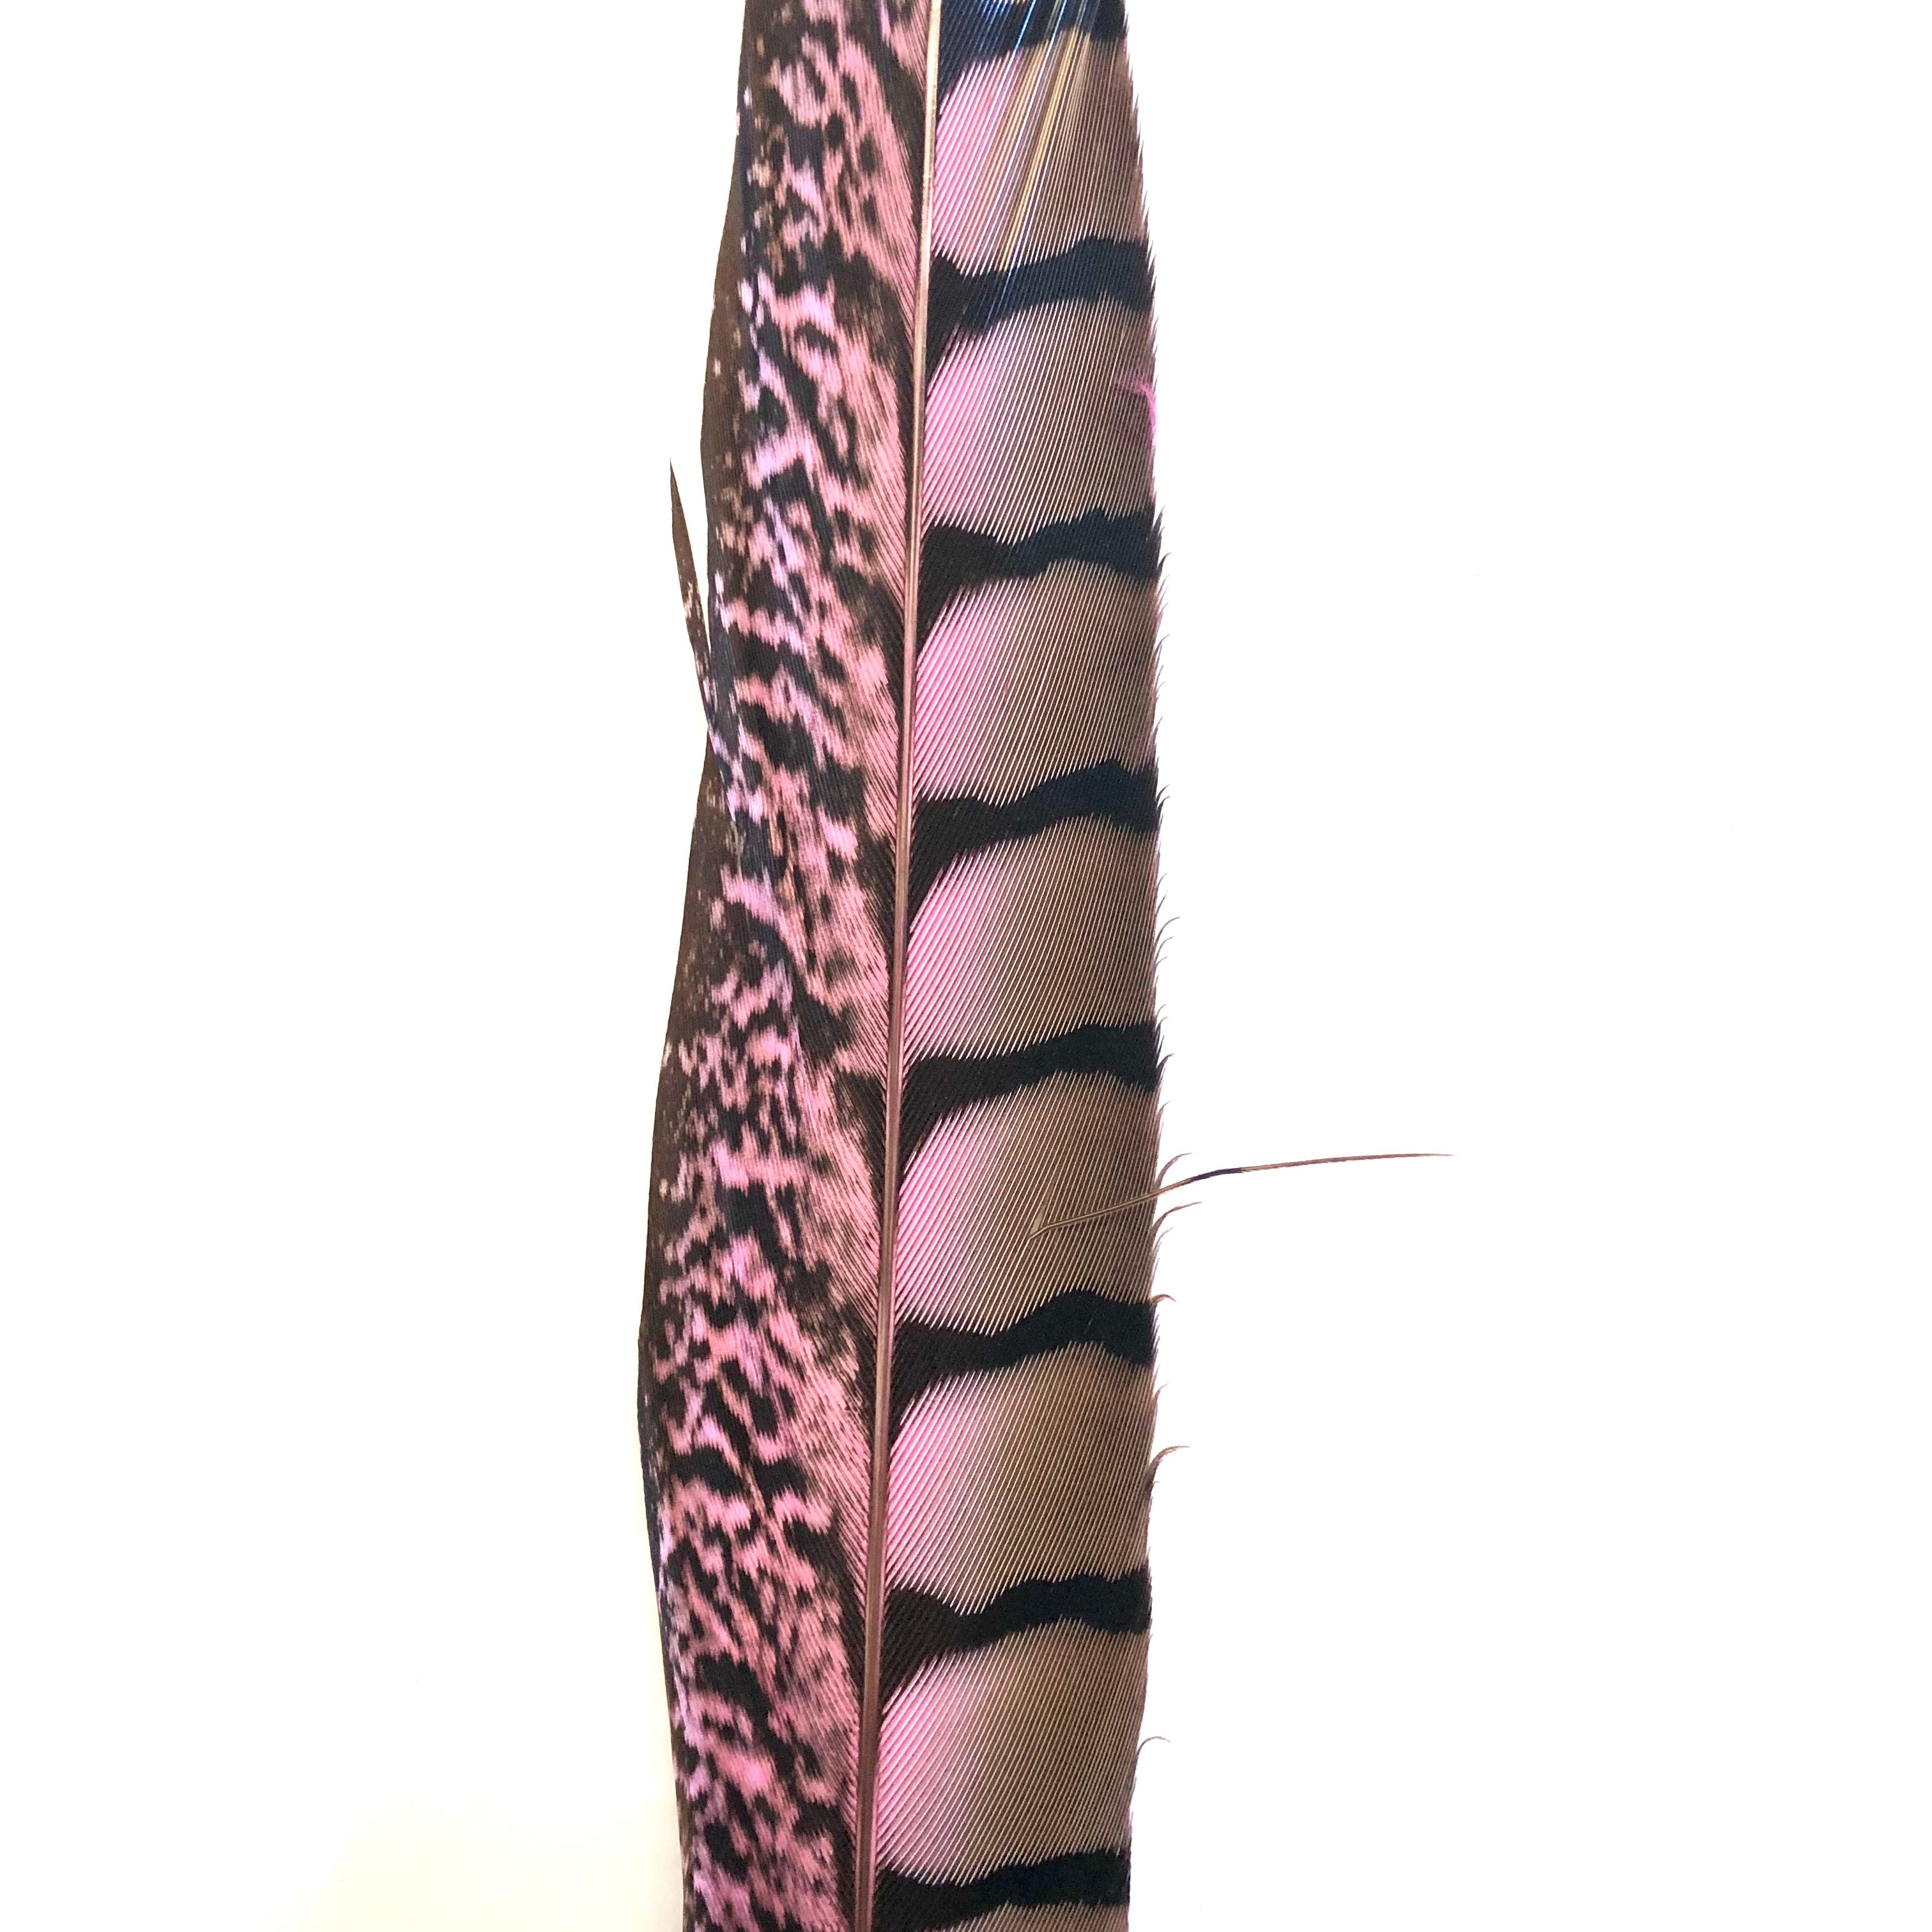 20" to 30" Lady Amherst Pheasant Side Tail Feather - Pink ((SECONDS))